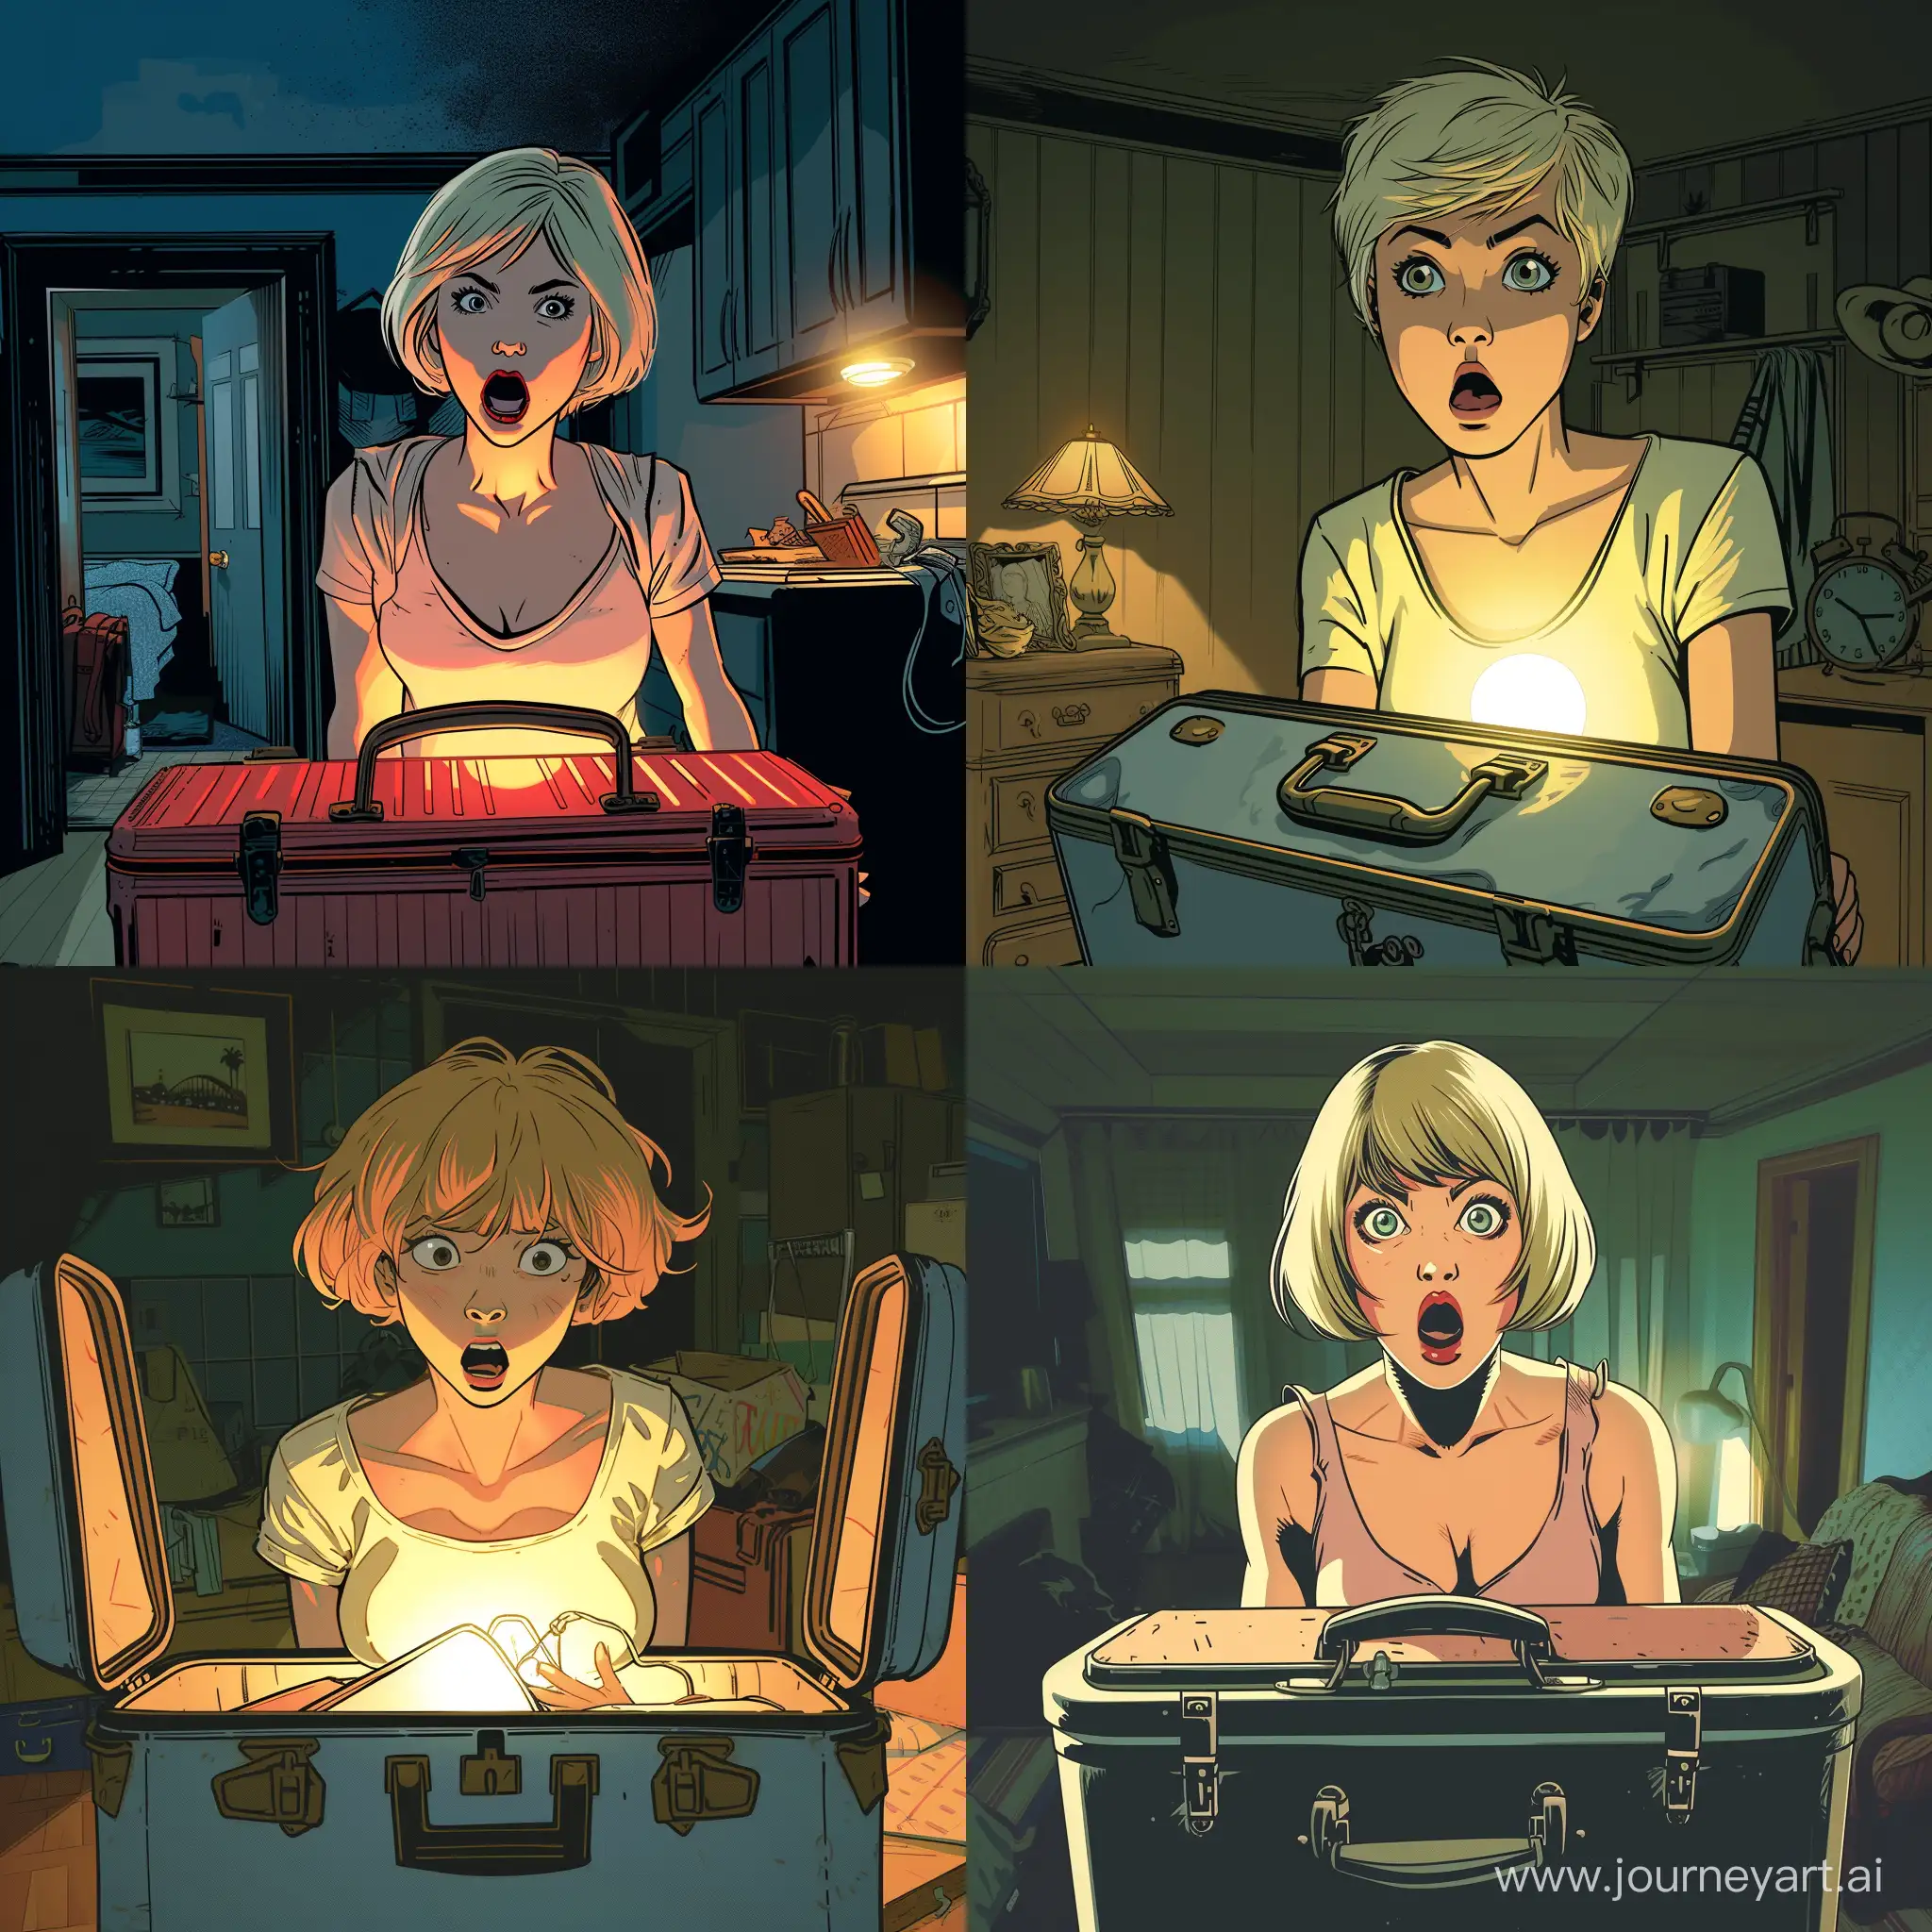 Blond-Girls-Astonishment-Unveiling-a-Mysterious-Suitcase-in-Dimly-Lit-Room-American-Comic-Book-Style